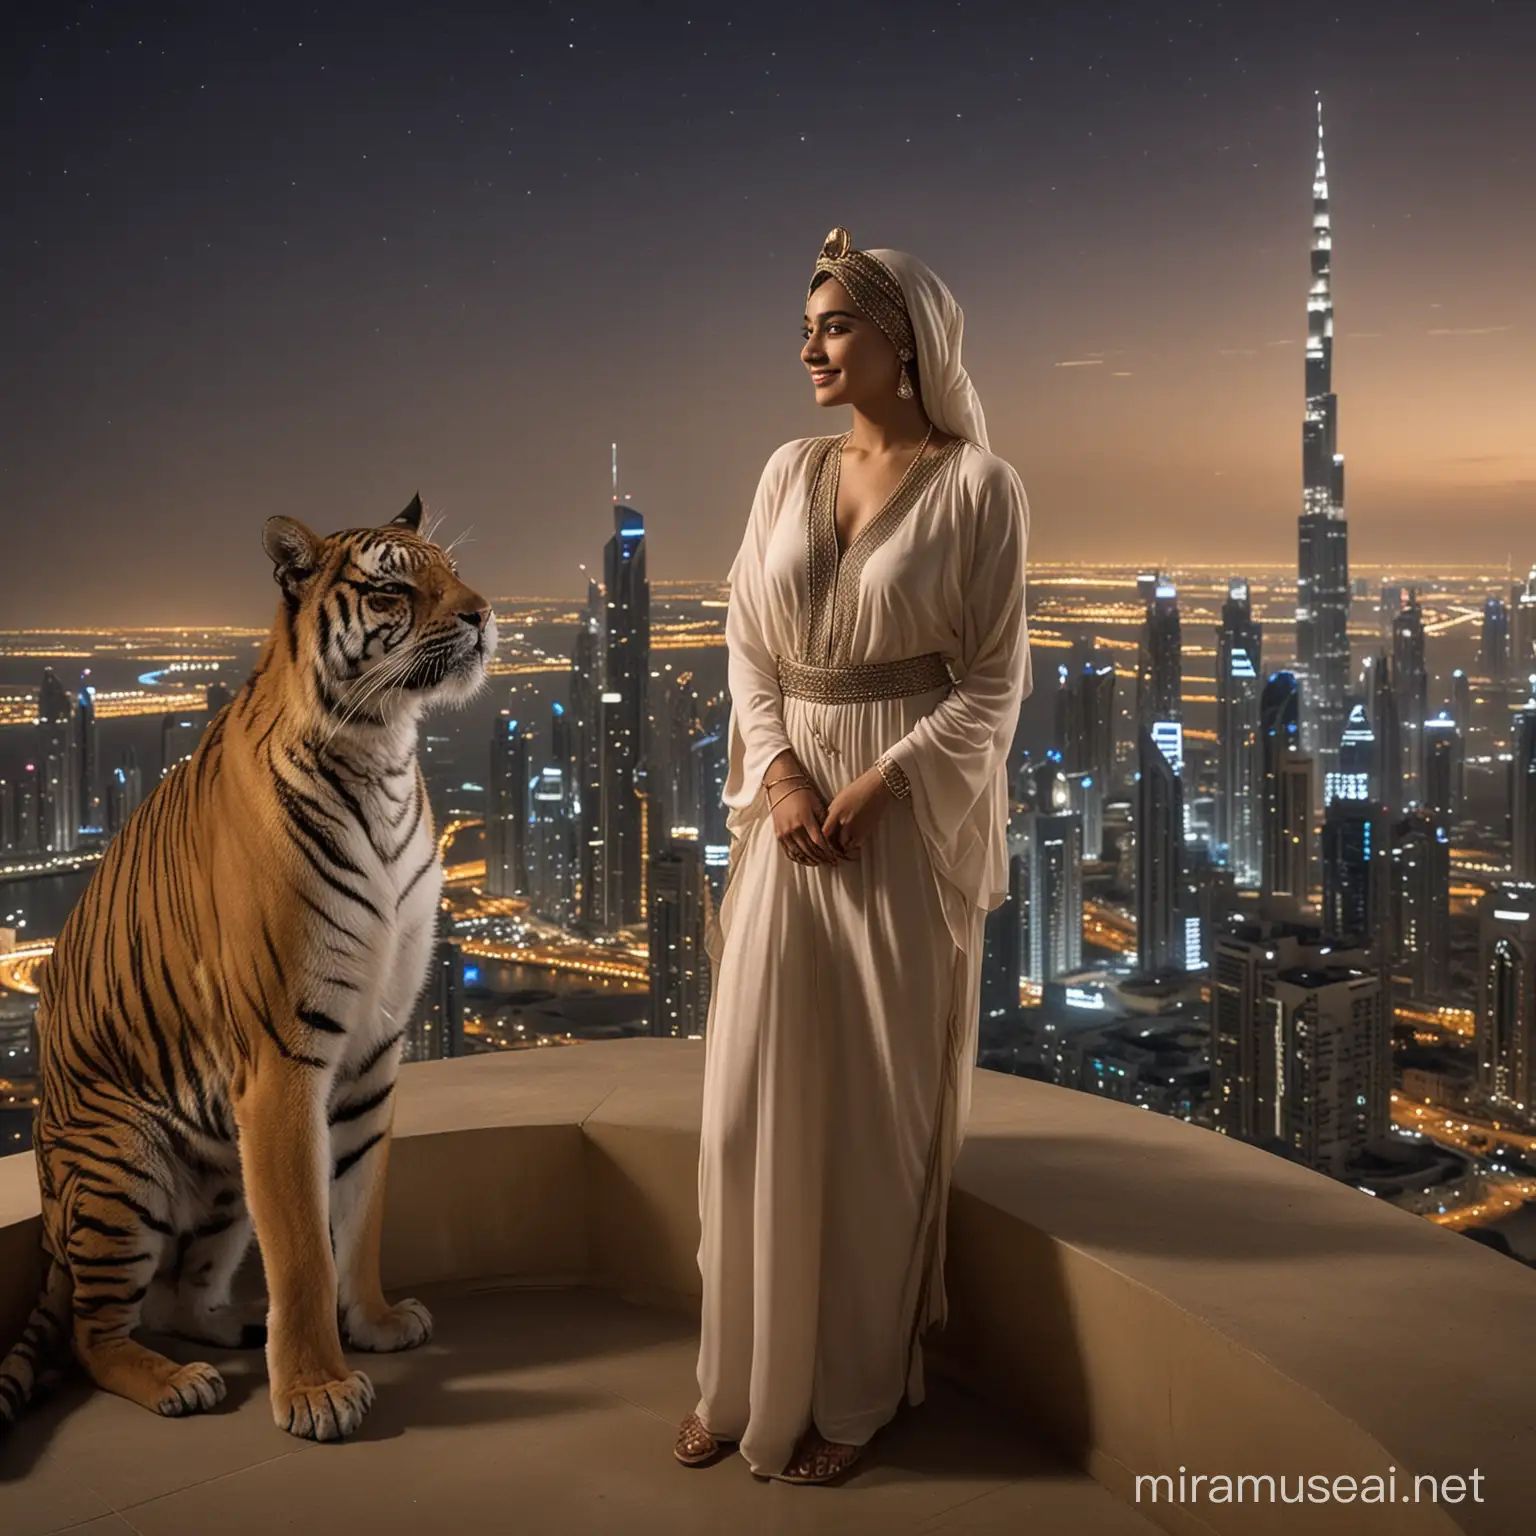 on the roof of a high-rise building, a penthouse loggia, a young Emirati woman stands at ease, a national modern outfit, an elegant turban, a large tiger next to her, the woman smiles slyly, the Dubai skyline is visible behind her. night, and the stars are clearly visible